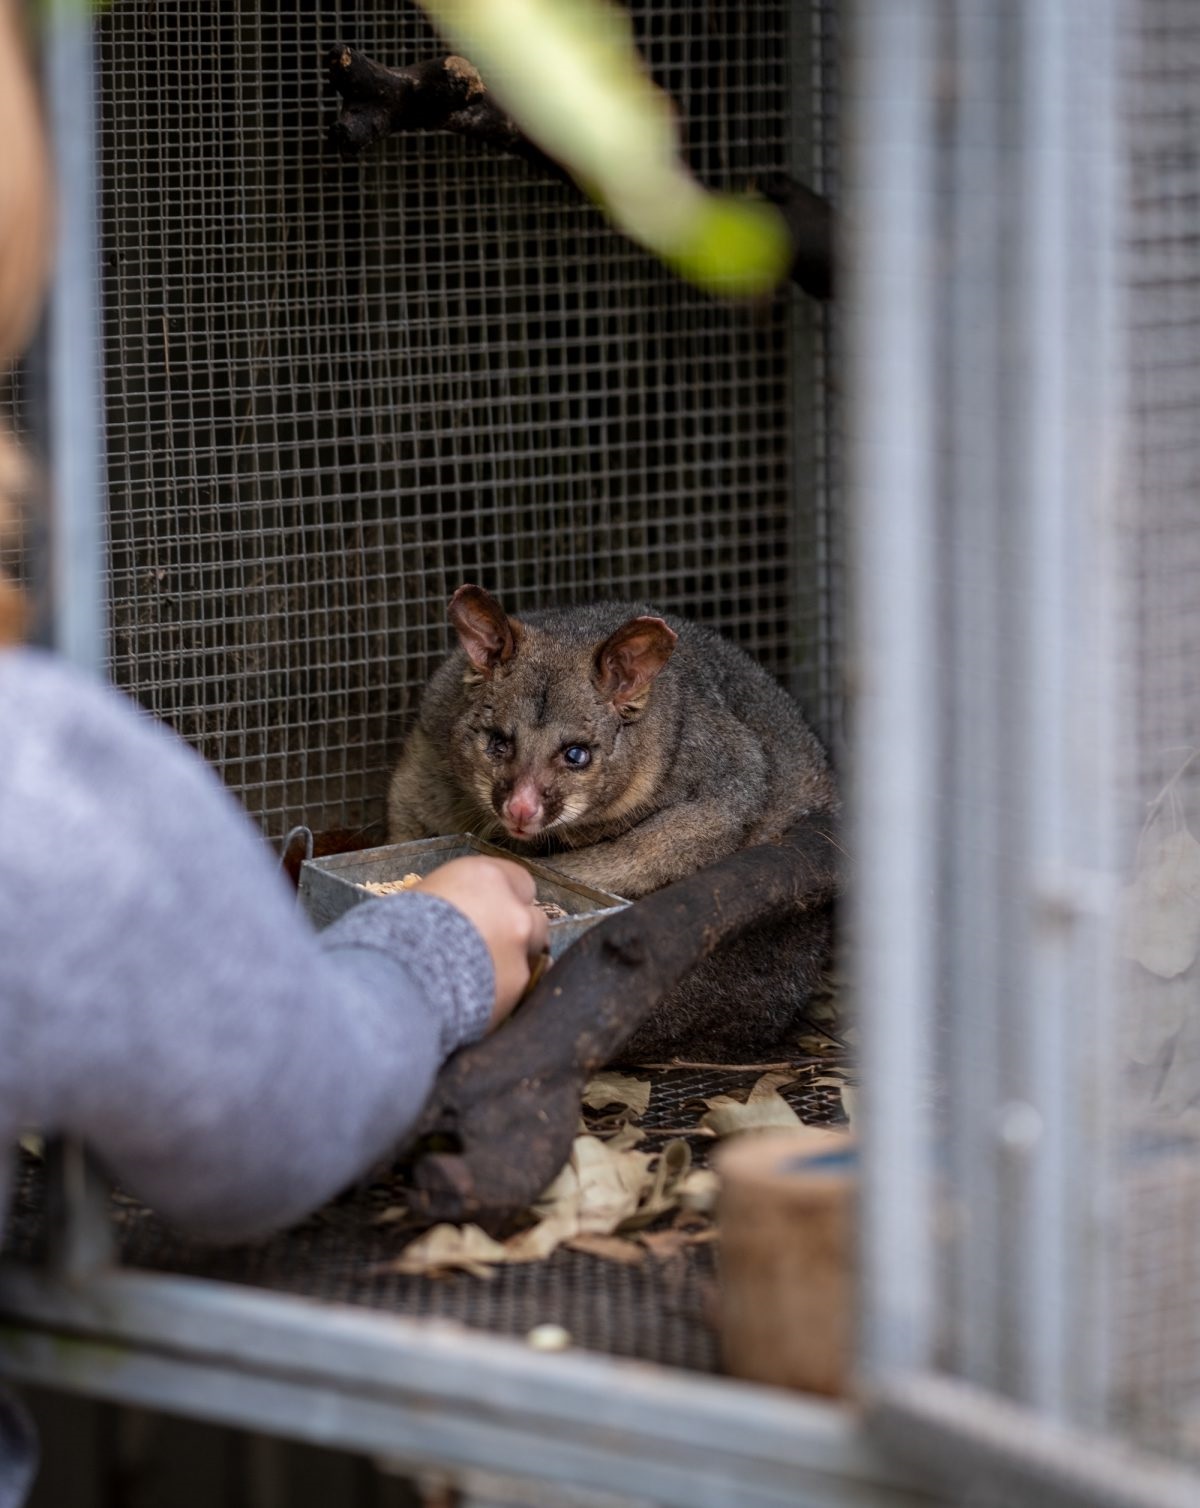 Cherry Gardens animal rescue centre Minton Farm is restoring native wildlife back to health and home in the Onkaparinga region and beyond.